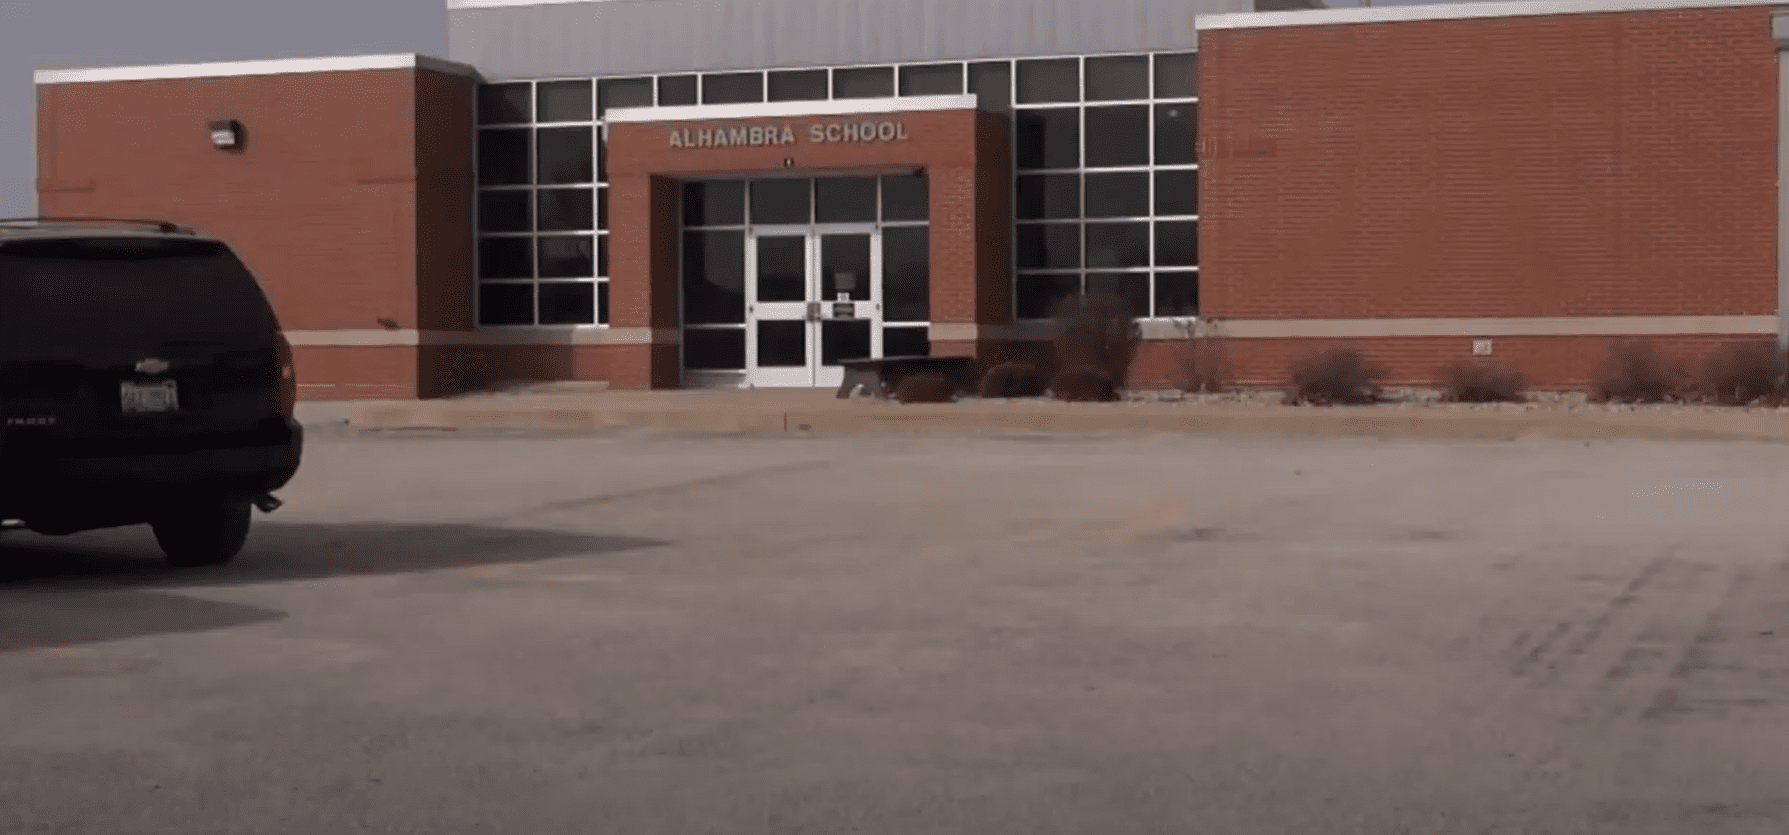 The Alhambra Elementary School in Madison County, Illinois. | Source: youtube.com/Kelley Hoskins Journalist St. Louis